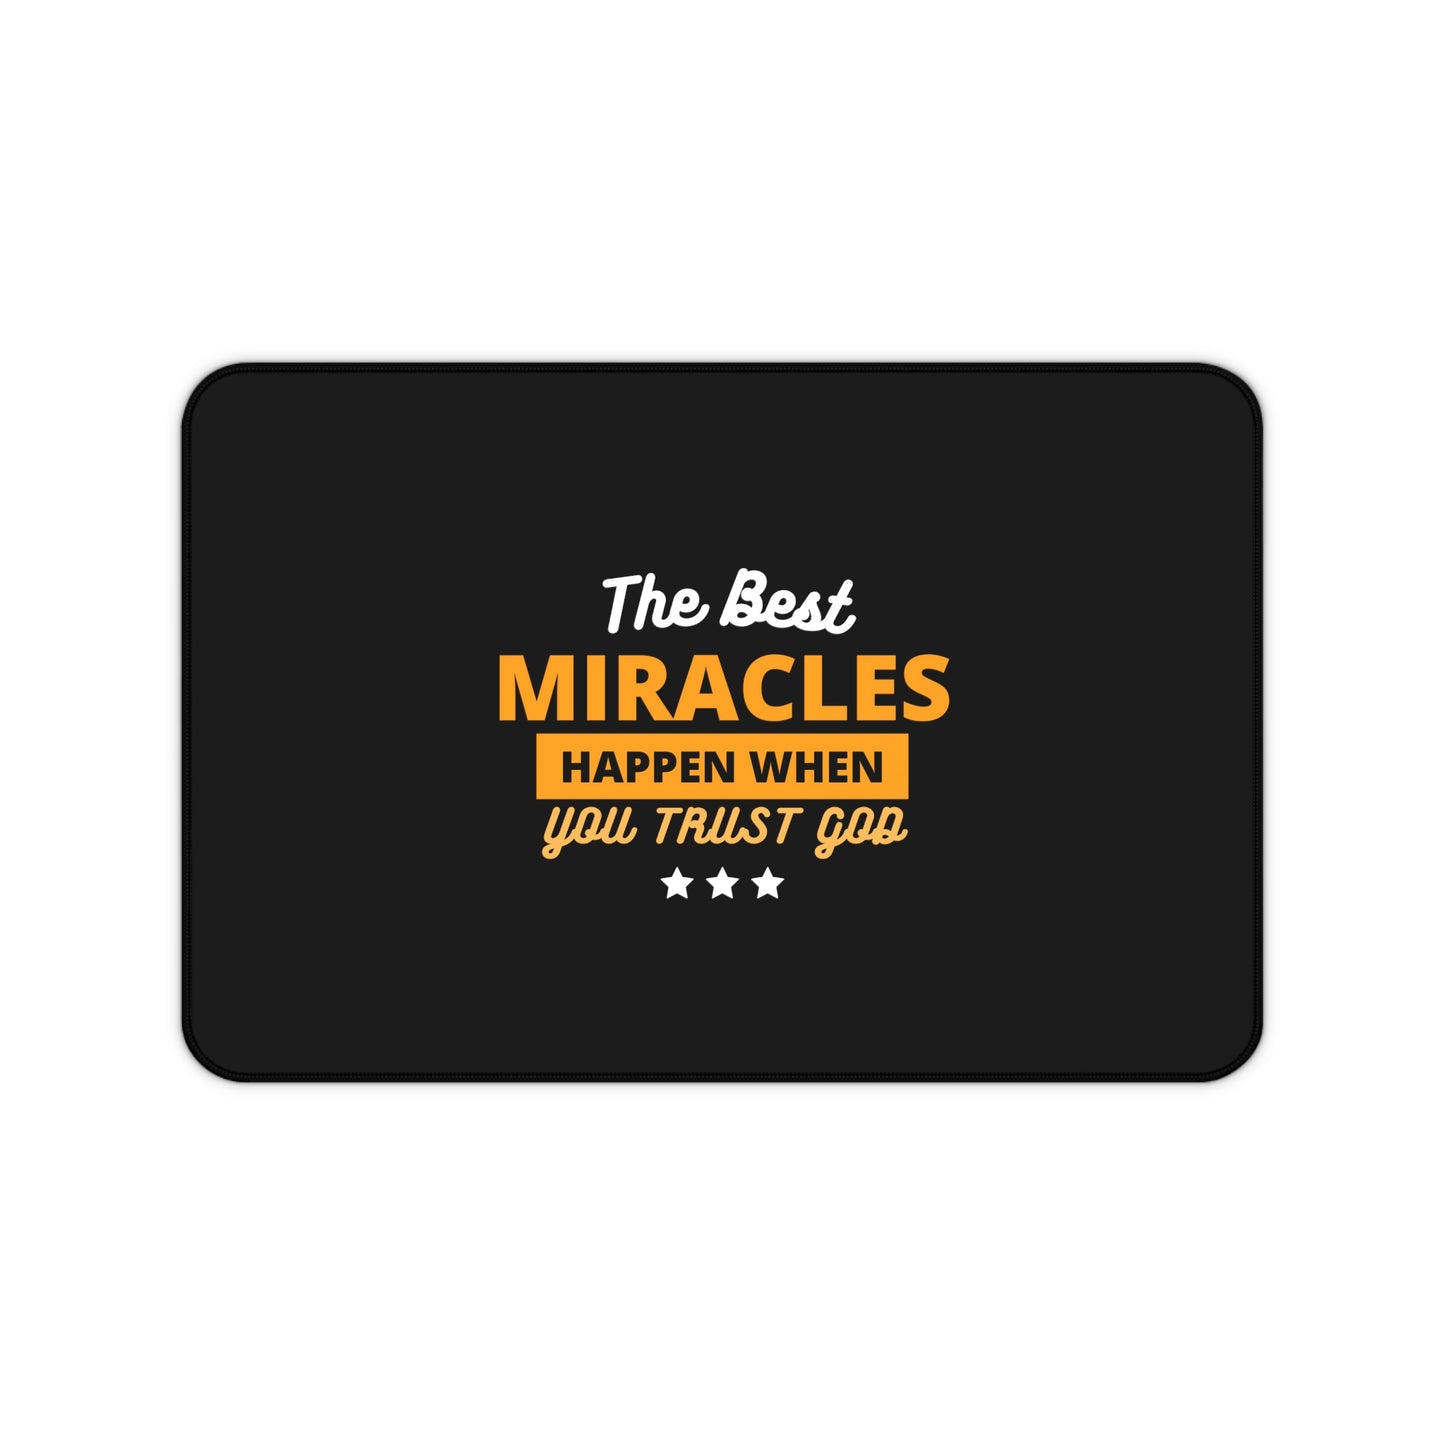 The Best Miracles Happen When You Trust God Christian Computer Keyboard Mouse Desk Mat